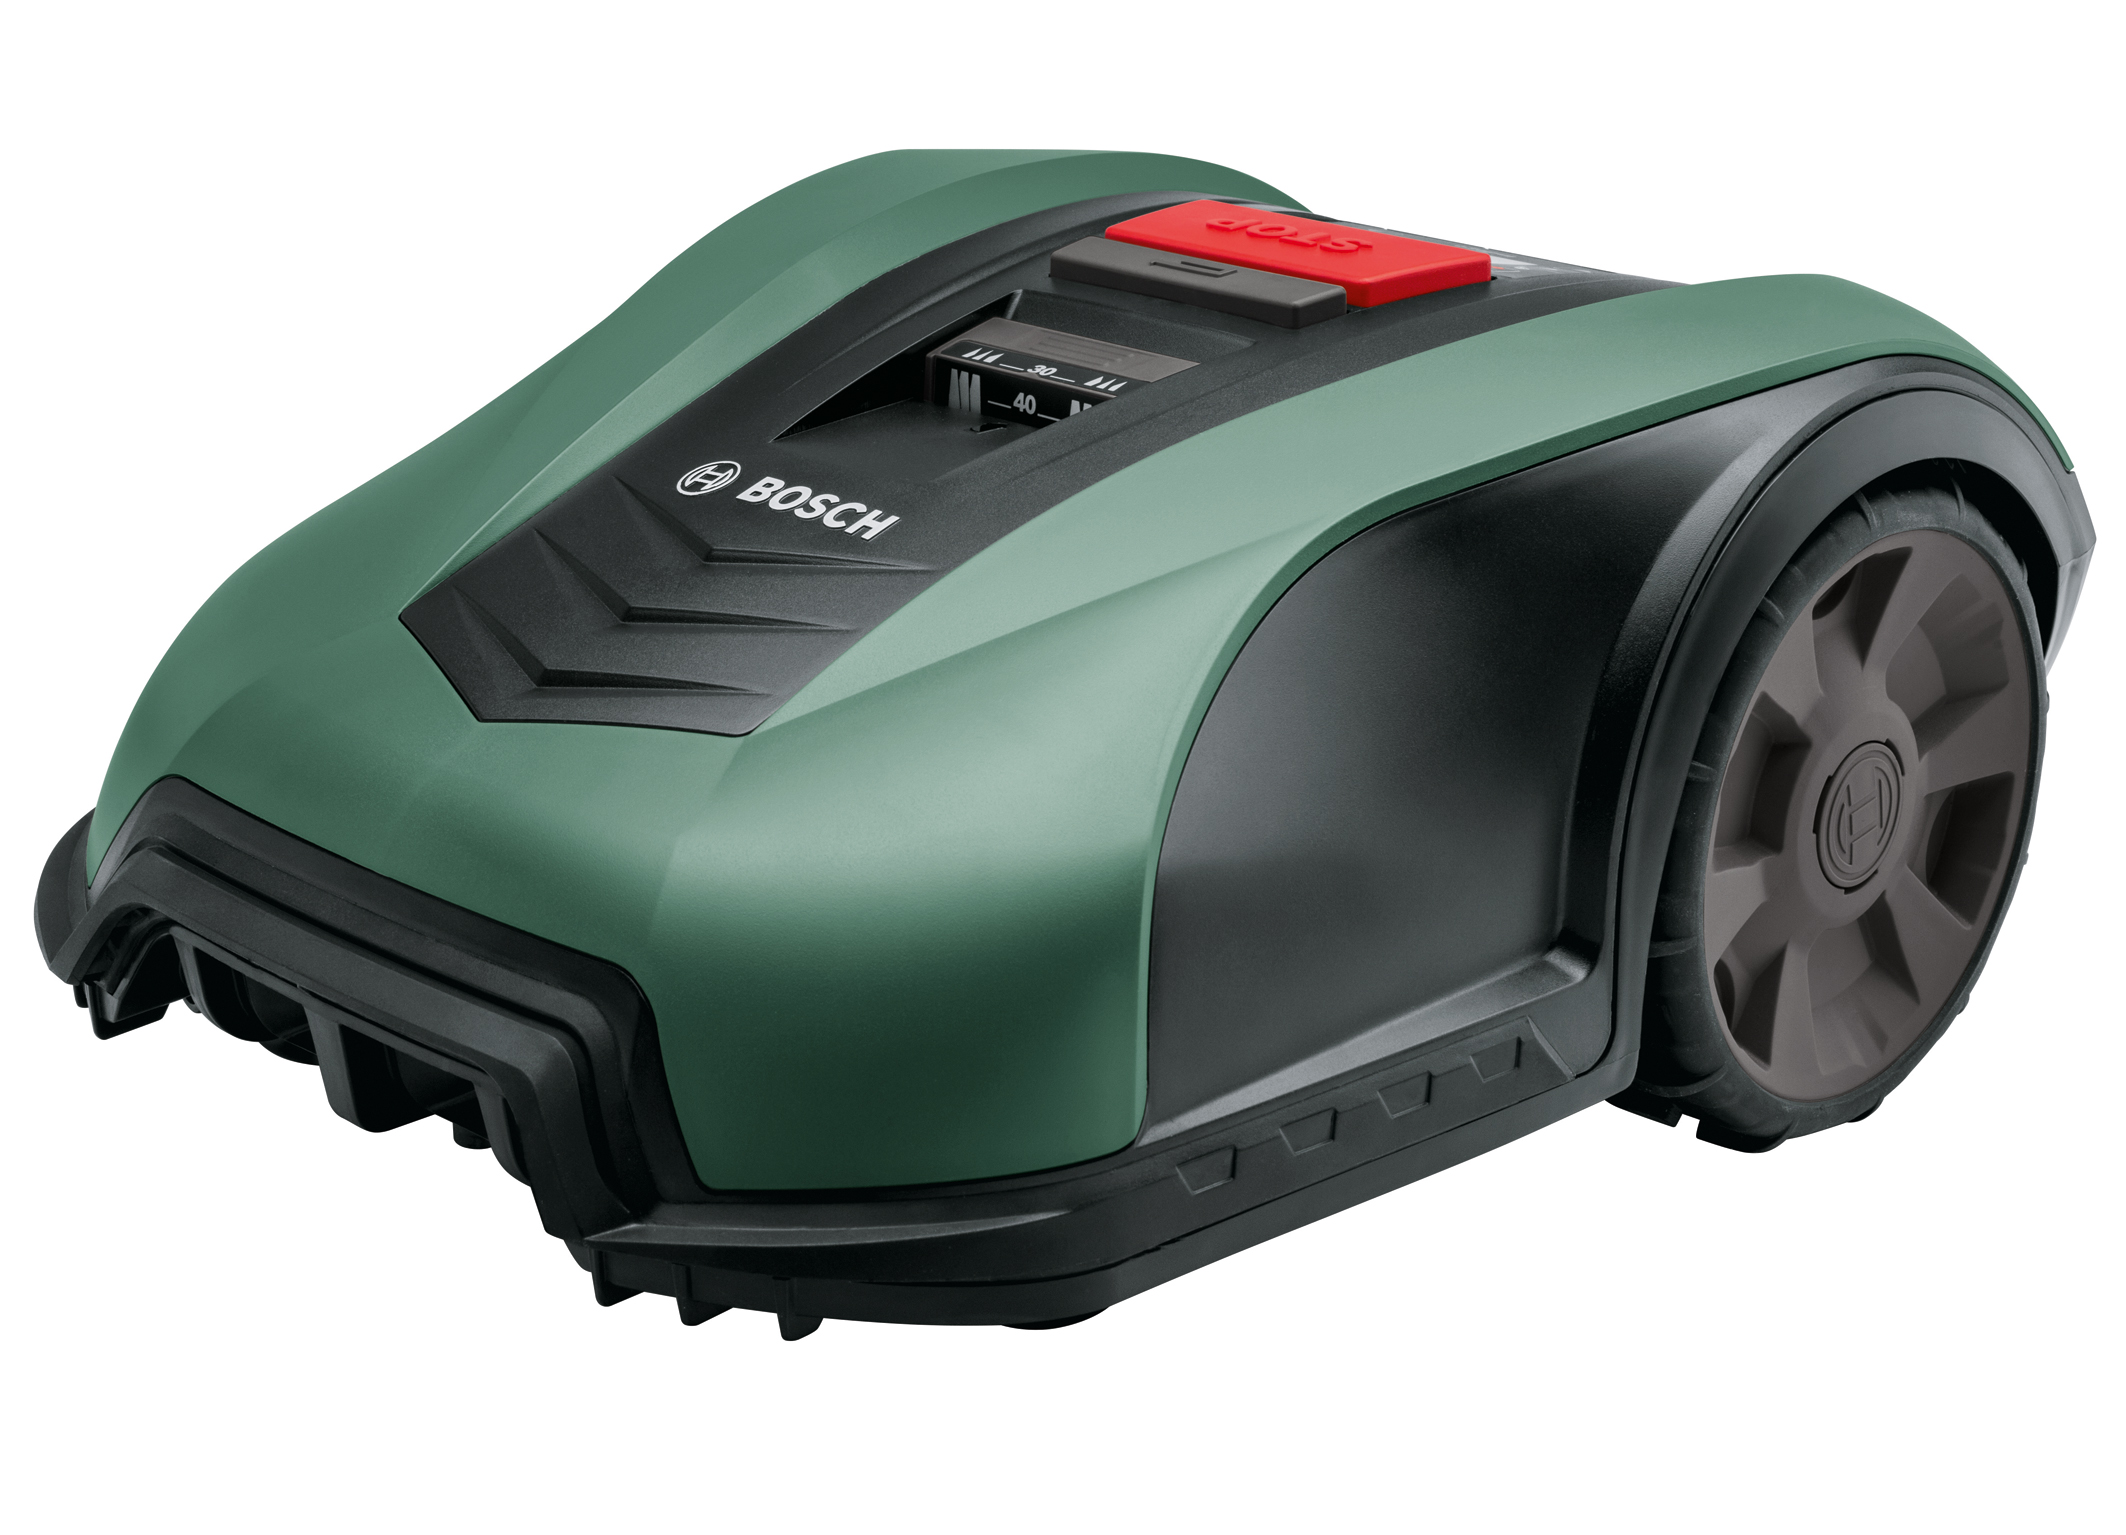 Autonomous lawn care for medium and large gardens: Bosch robotic lawnmowers Indego M 700 and Indego M+ 700